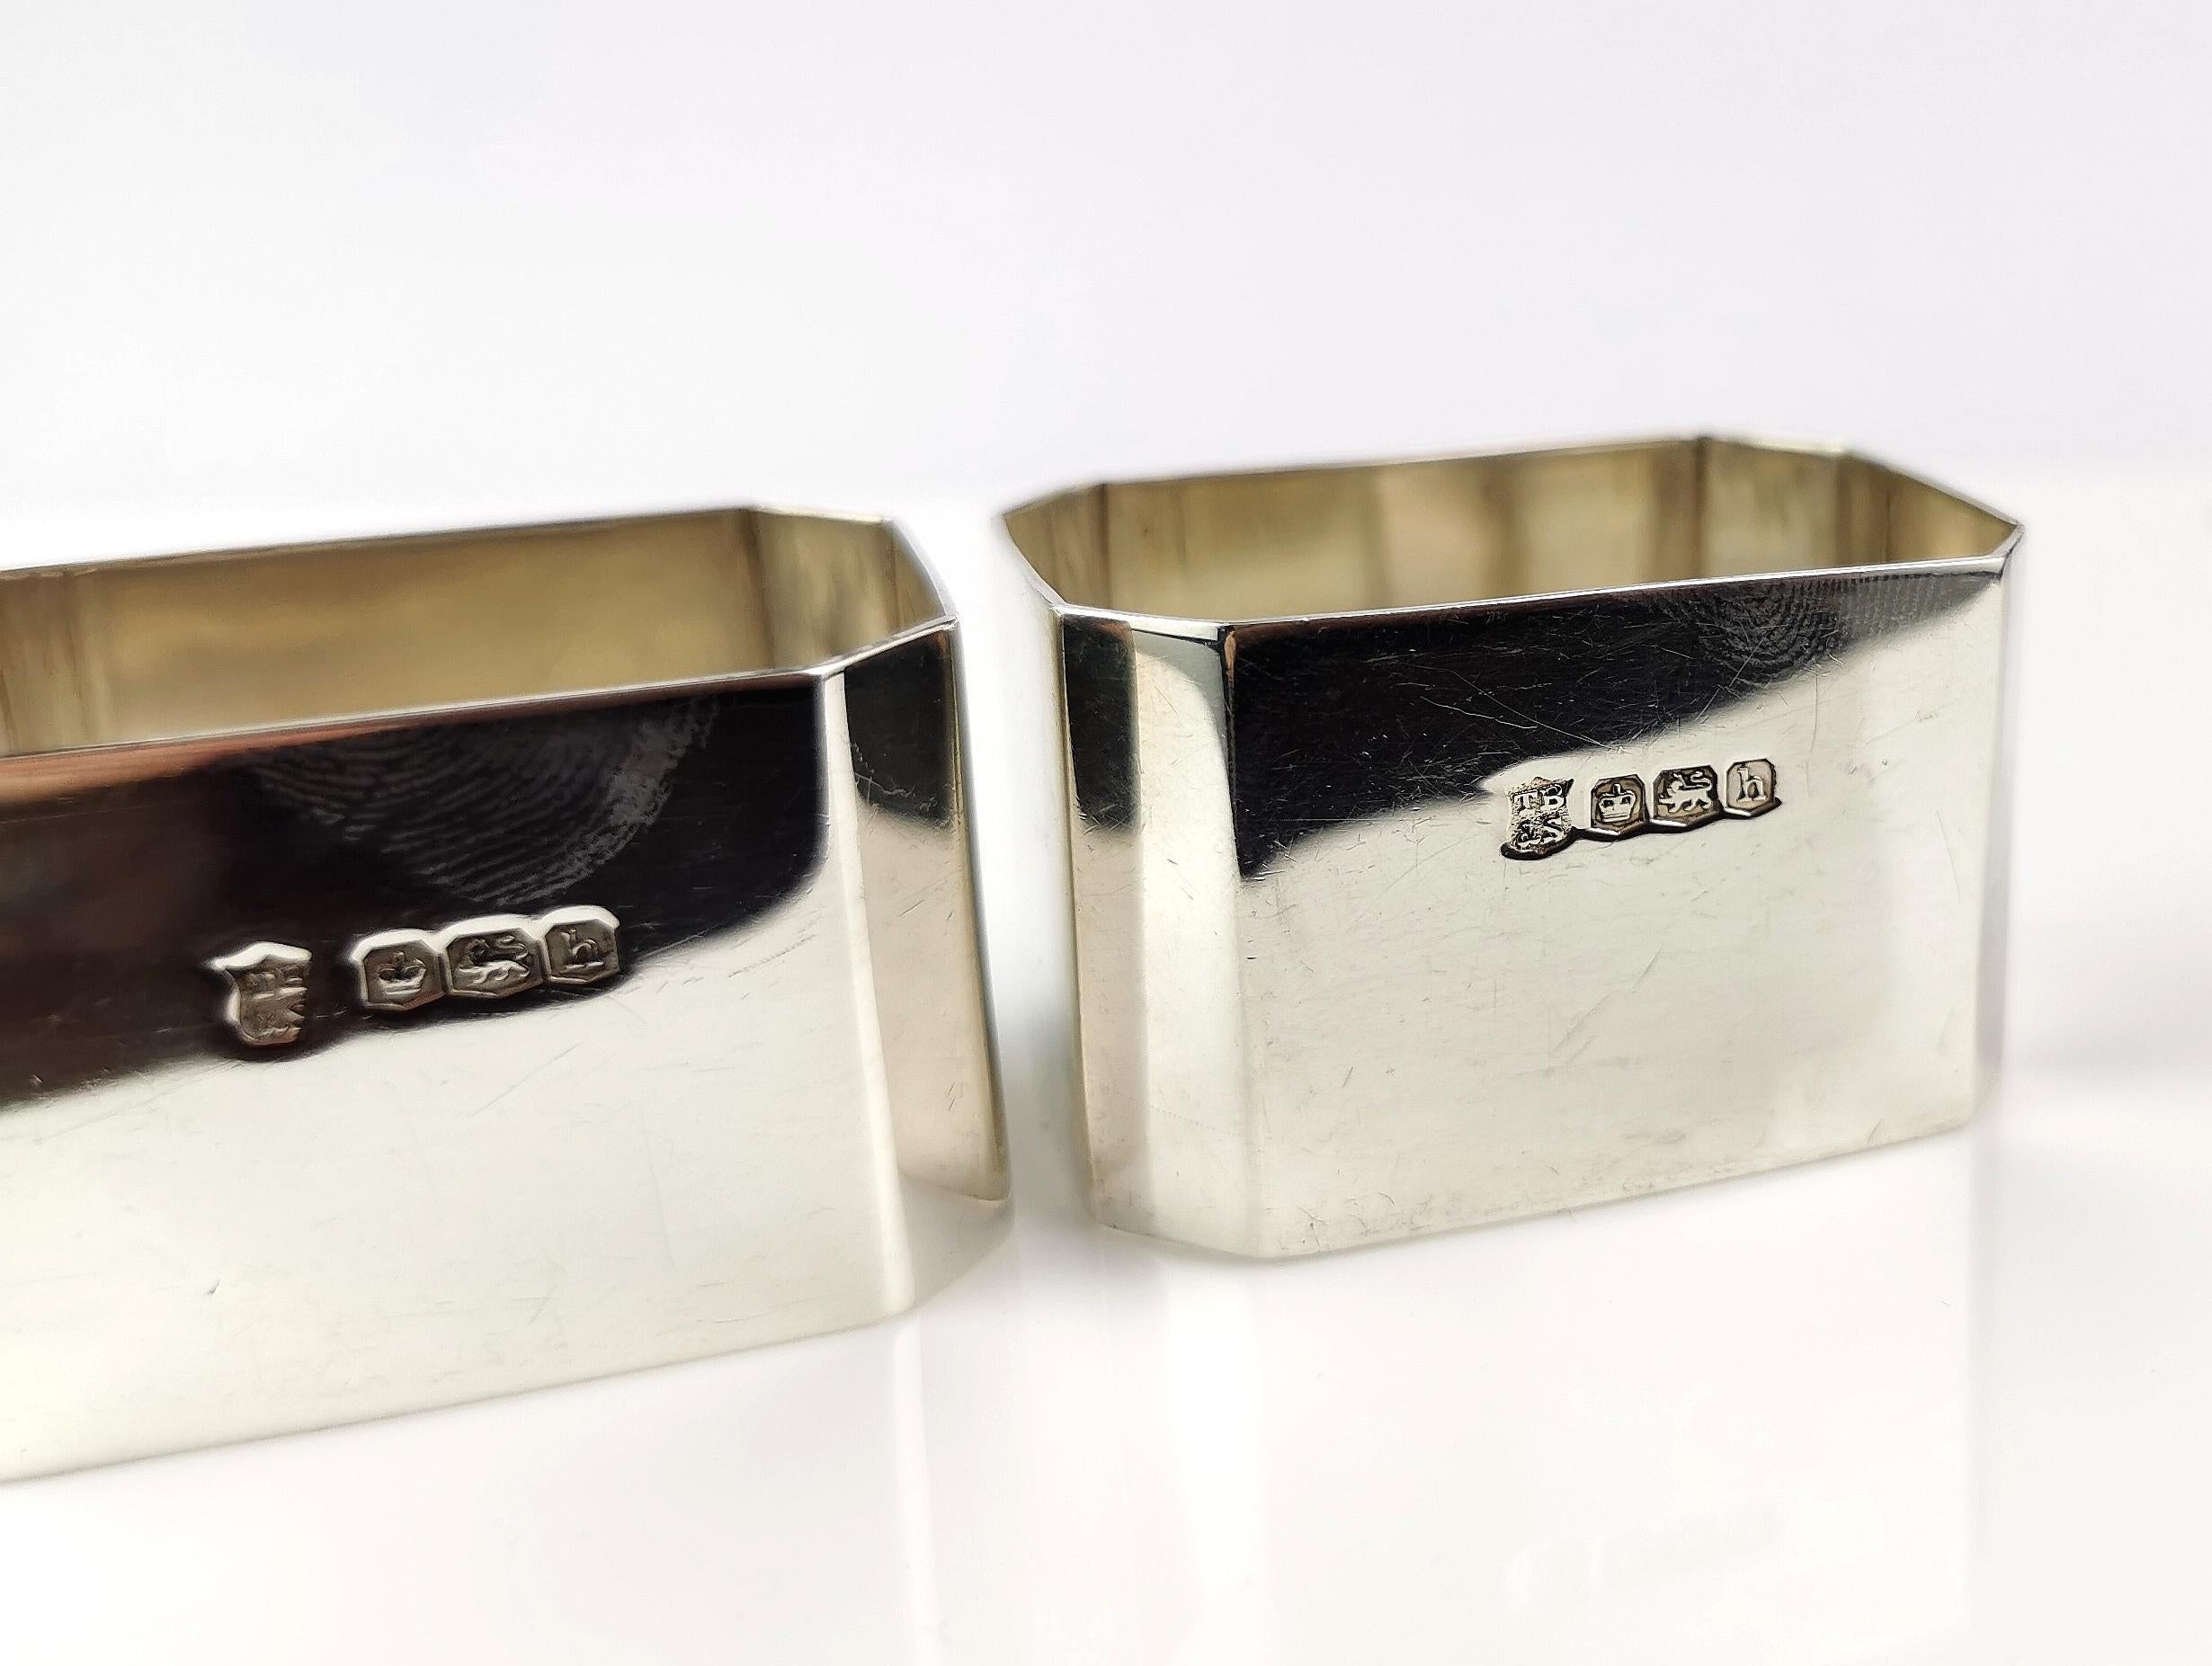 Vintage Art Deco sterling silver napkin rings, Pair, Geometric  For Sale 1